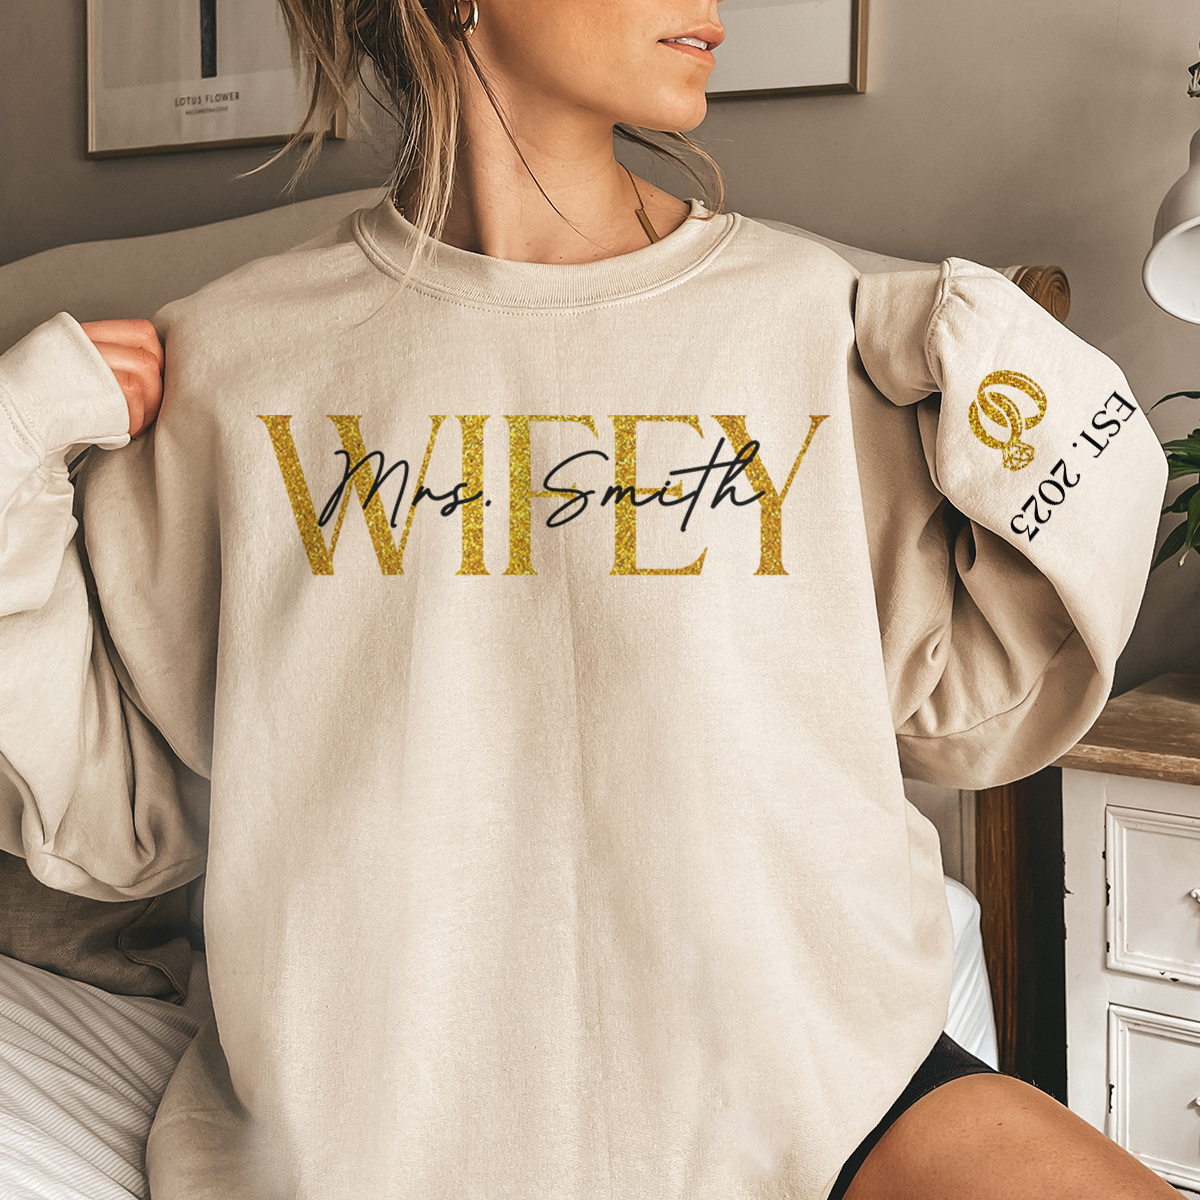 The Love Of My Life My Wifey - Personalized Shirt With Design On Sleeve - Gift For Wife, Anniversary Gift